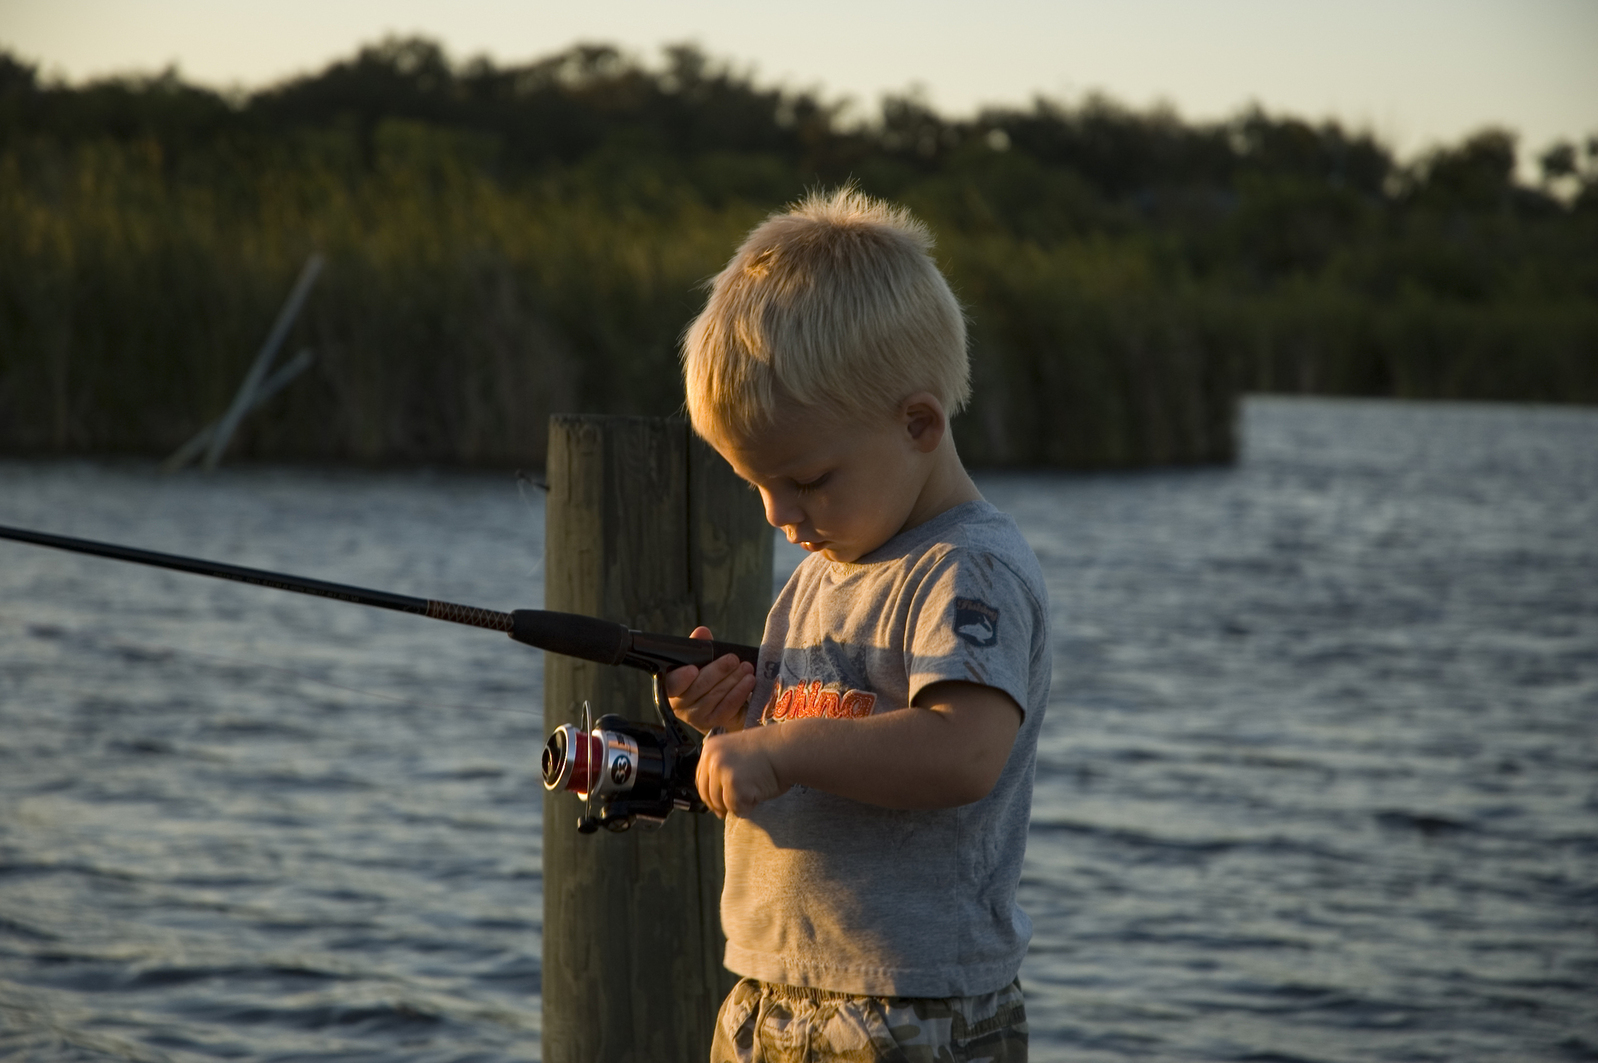 Take Kids Fishing Day' gives away free fishing gear to build love for  outdoors